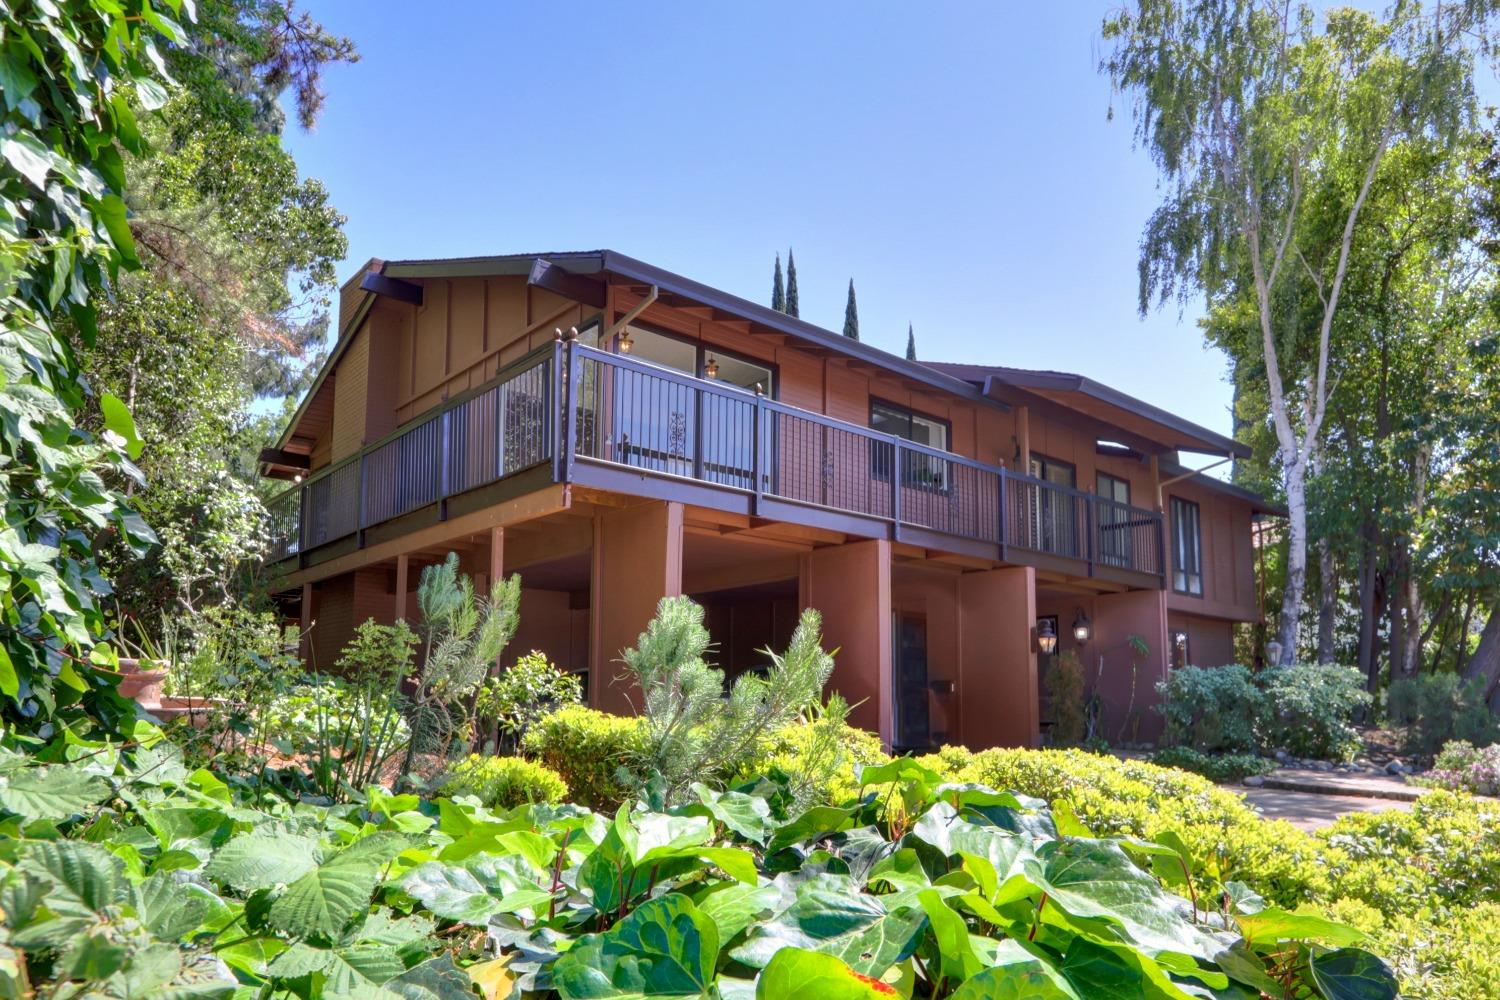 Wow! Check out this amazing custom Wilhaggin home backing up to the American River Parkway! Welcome to this one-of-a-kind treetop gem where you do most of your living upstairs! So much natural light! Vaulted ceilings in your huge family room w/dining area, large kitchen, formal office, formal living room & spacious primary bedroom w/en suite bath. Step outside of any room onto your wrap-around balcony w/views of the AR Pkwy or your huge swimming pool/spa below. Excellent public schools K-12 nearby along w/dozens of restaurants. Absolute entertainer's dream!